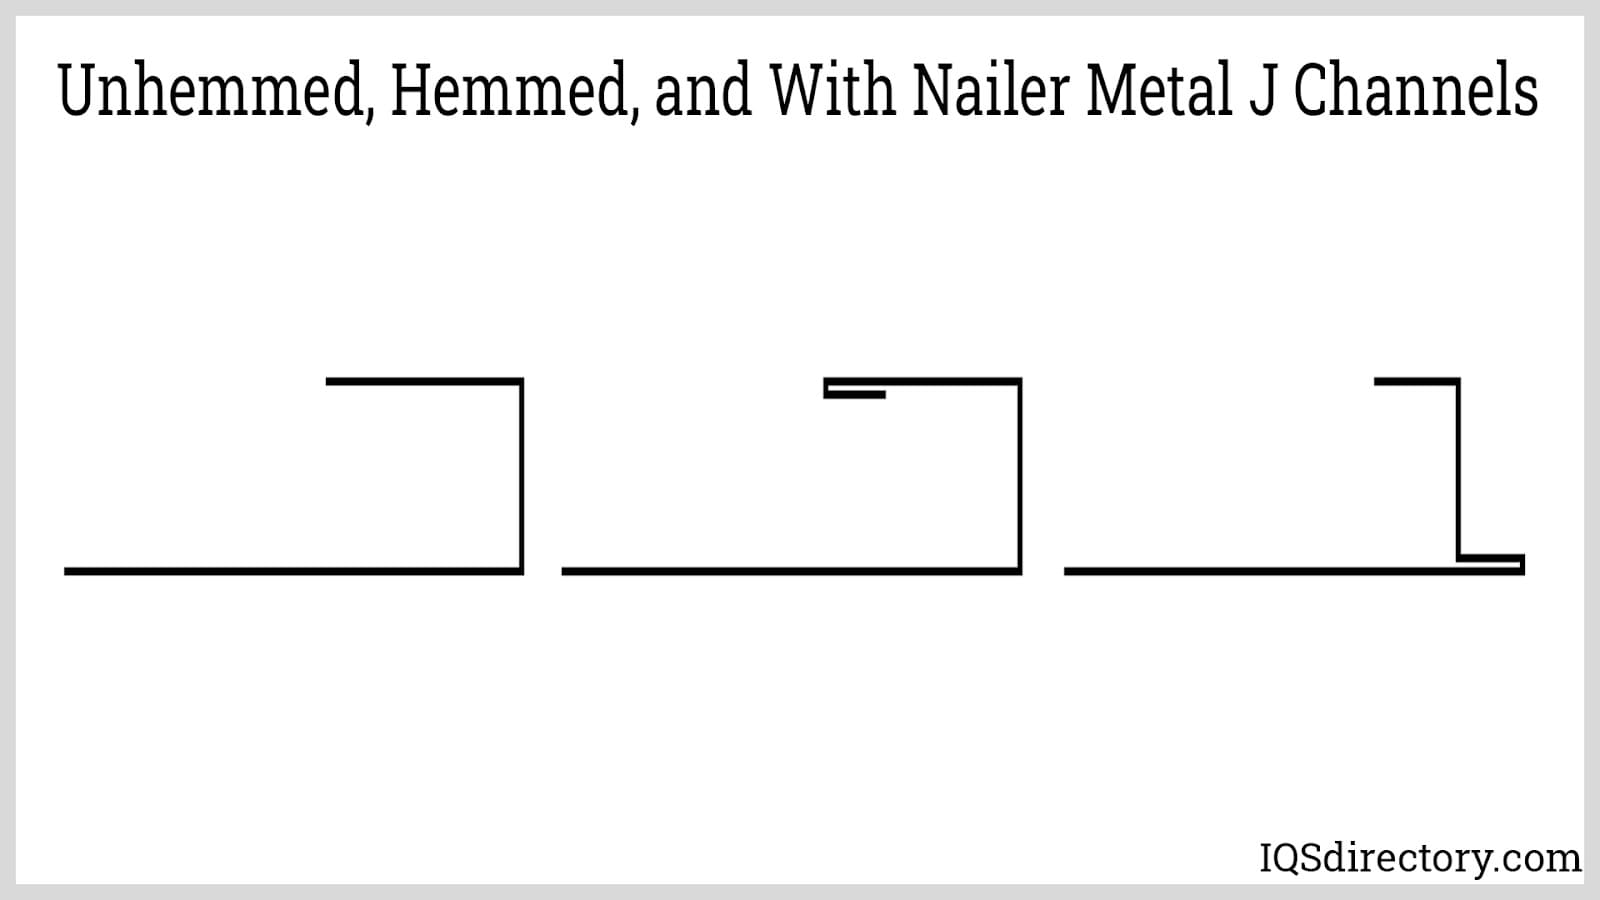 Unhemmed, Hemmed, and with Nailer Metal J Channels